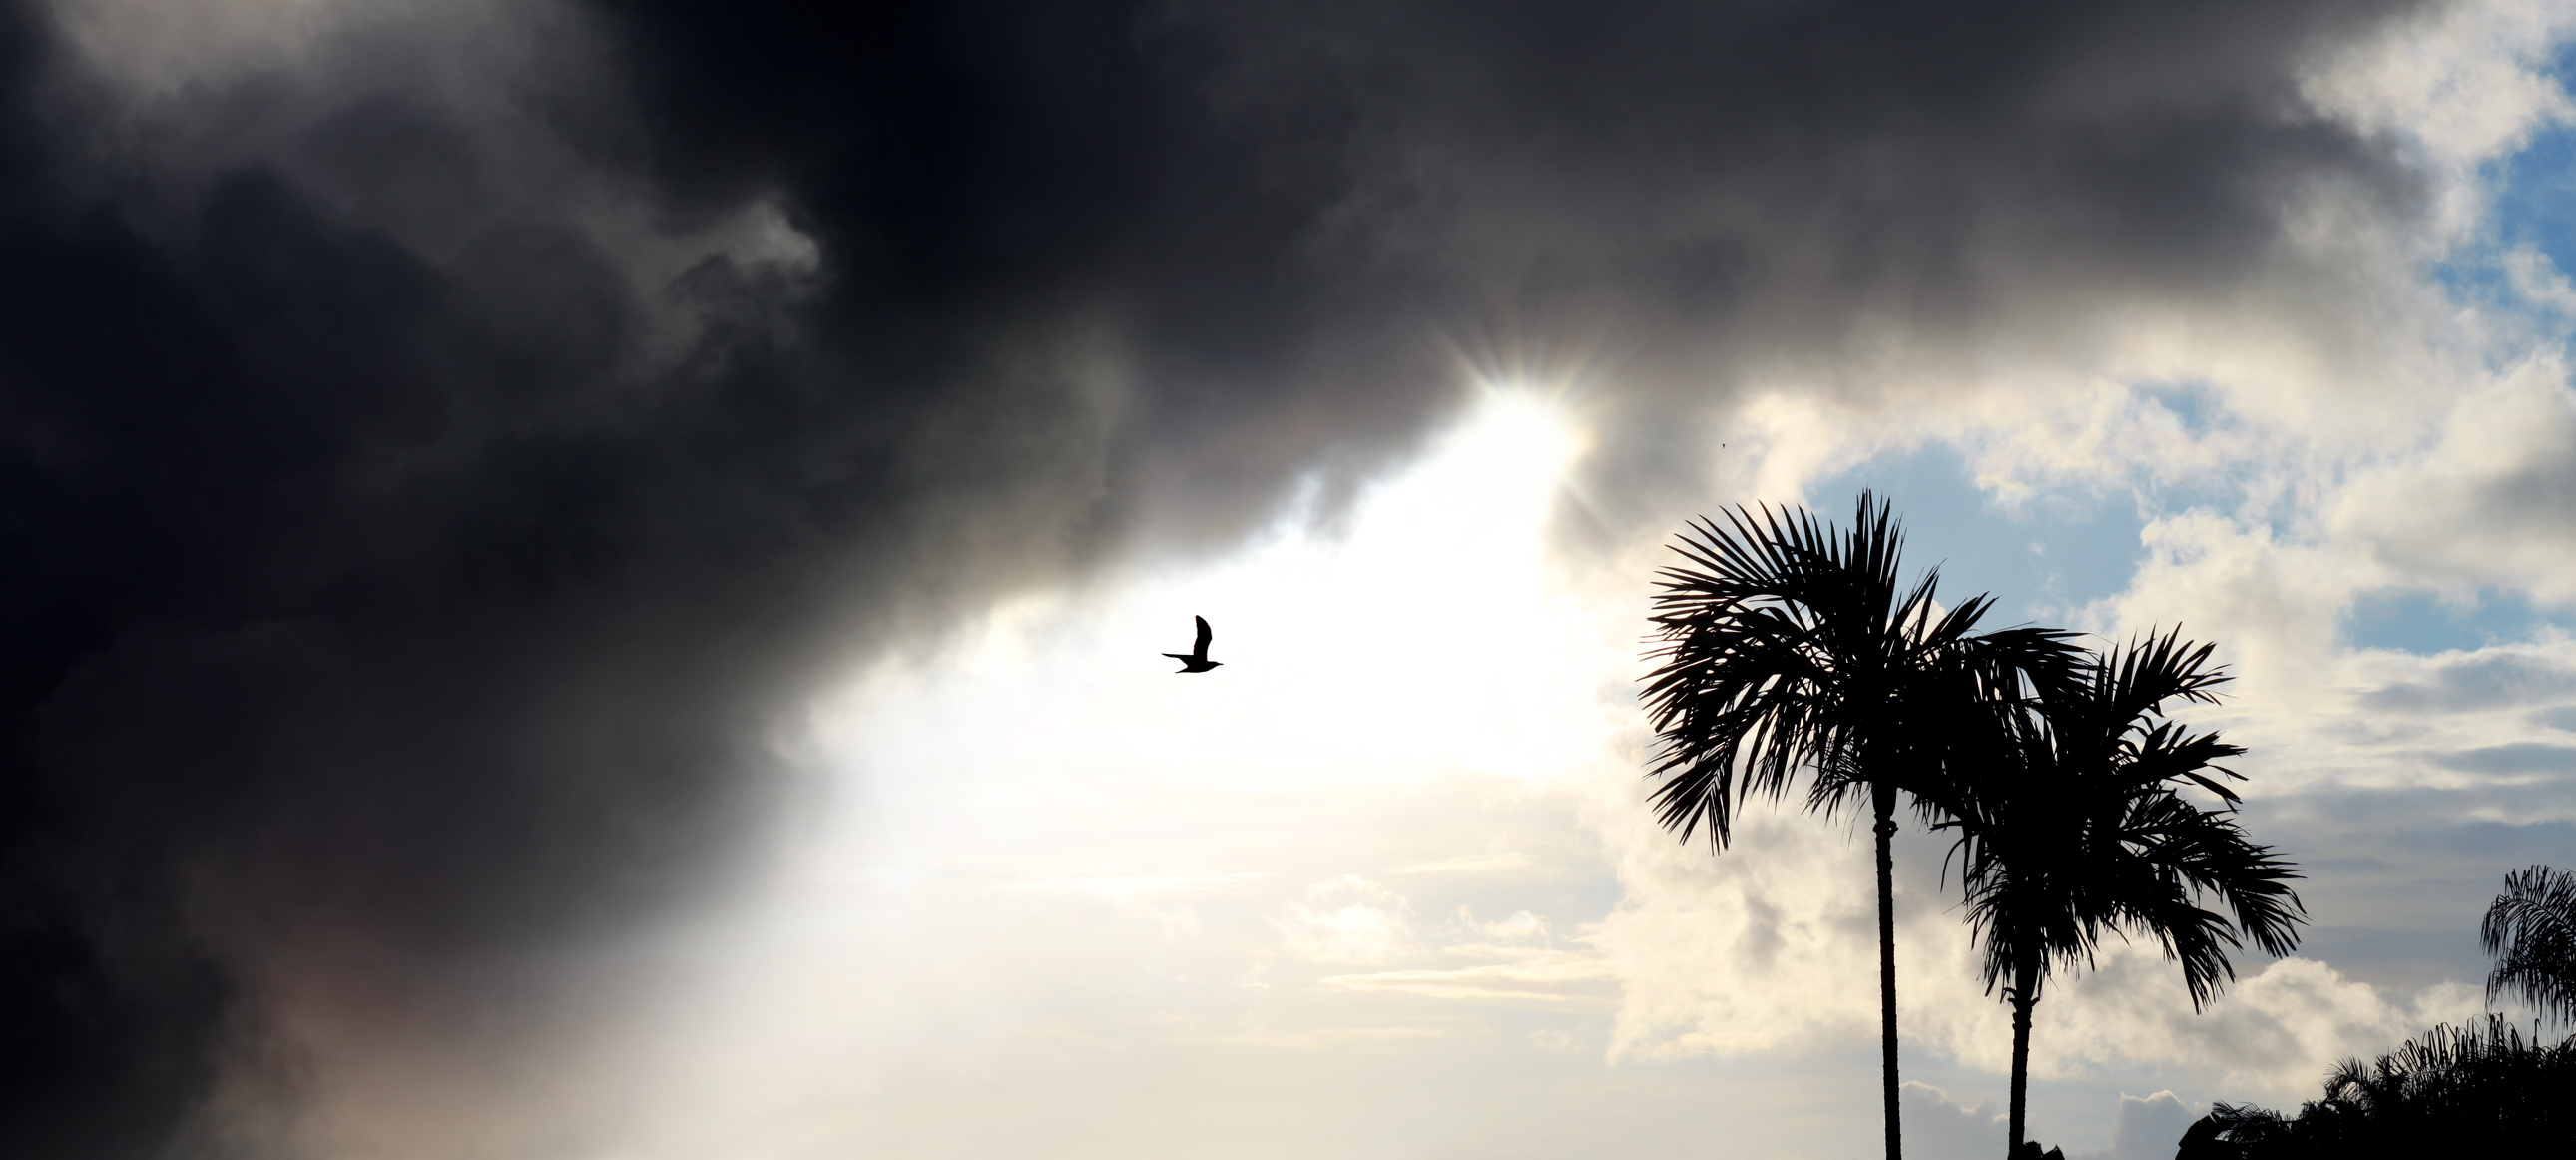 Stock photo of palm trees with clearing, stormy sky